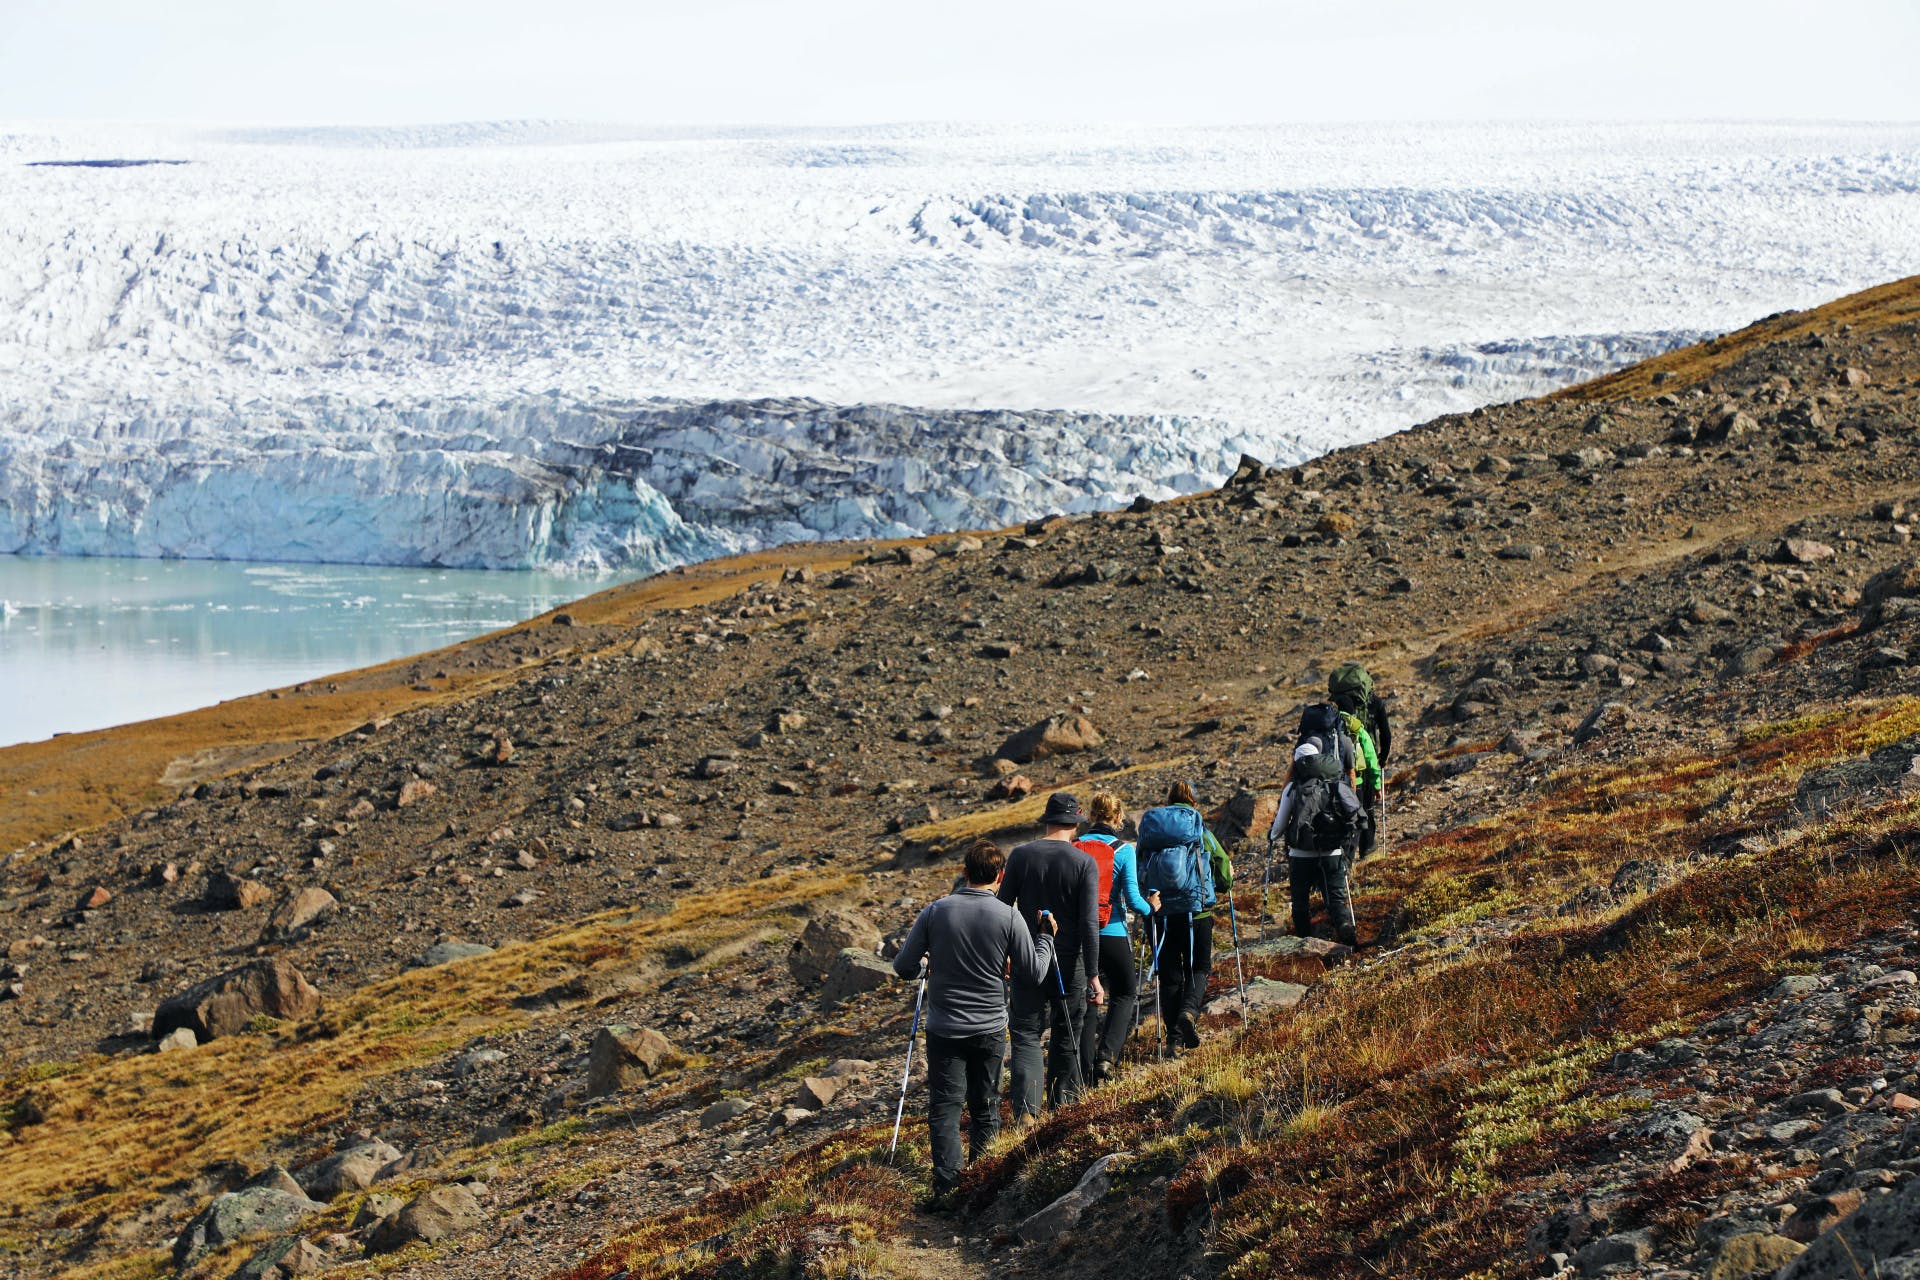 Nearing the end of our Greenland Wilderness Expedition to the Greenland Ice Sheet.